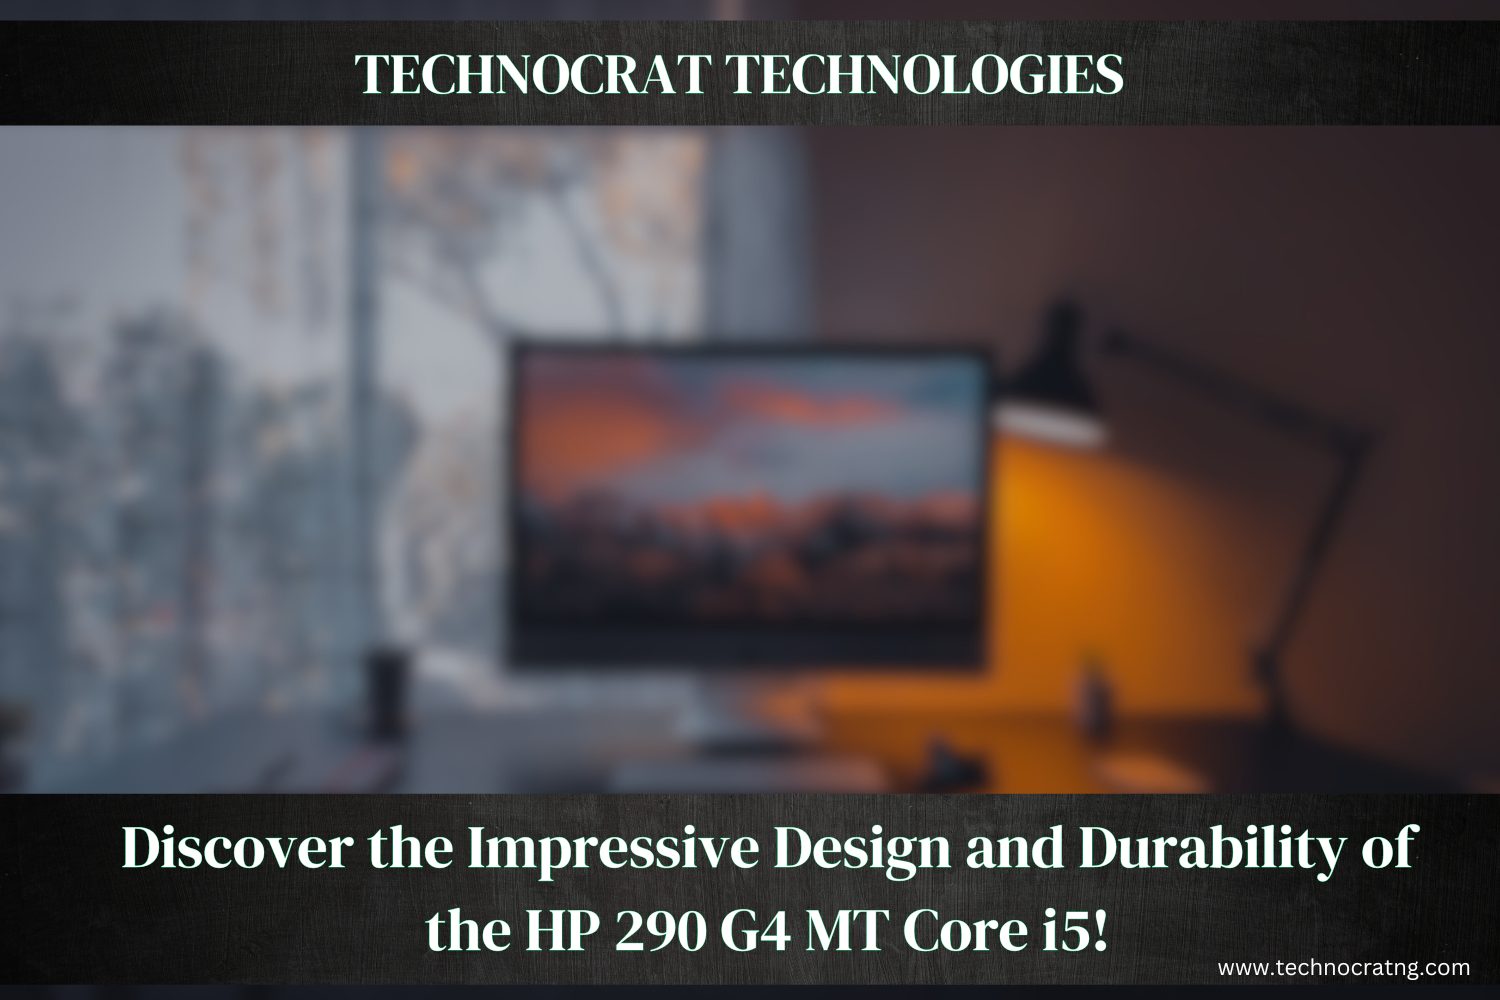 Discover the Impressive Design and Durability of the HP 290 G4 MT Core i5!